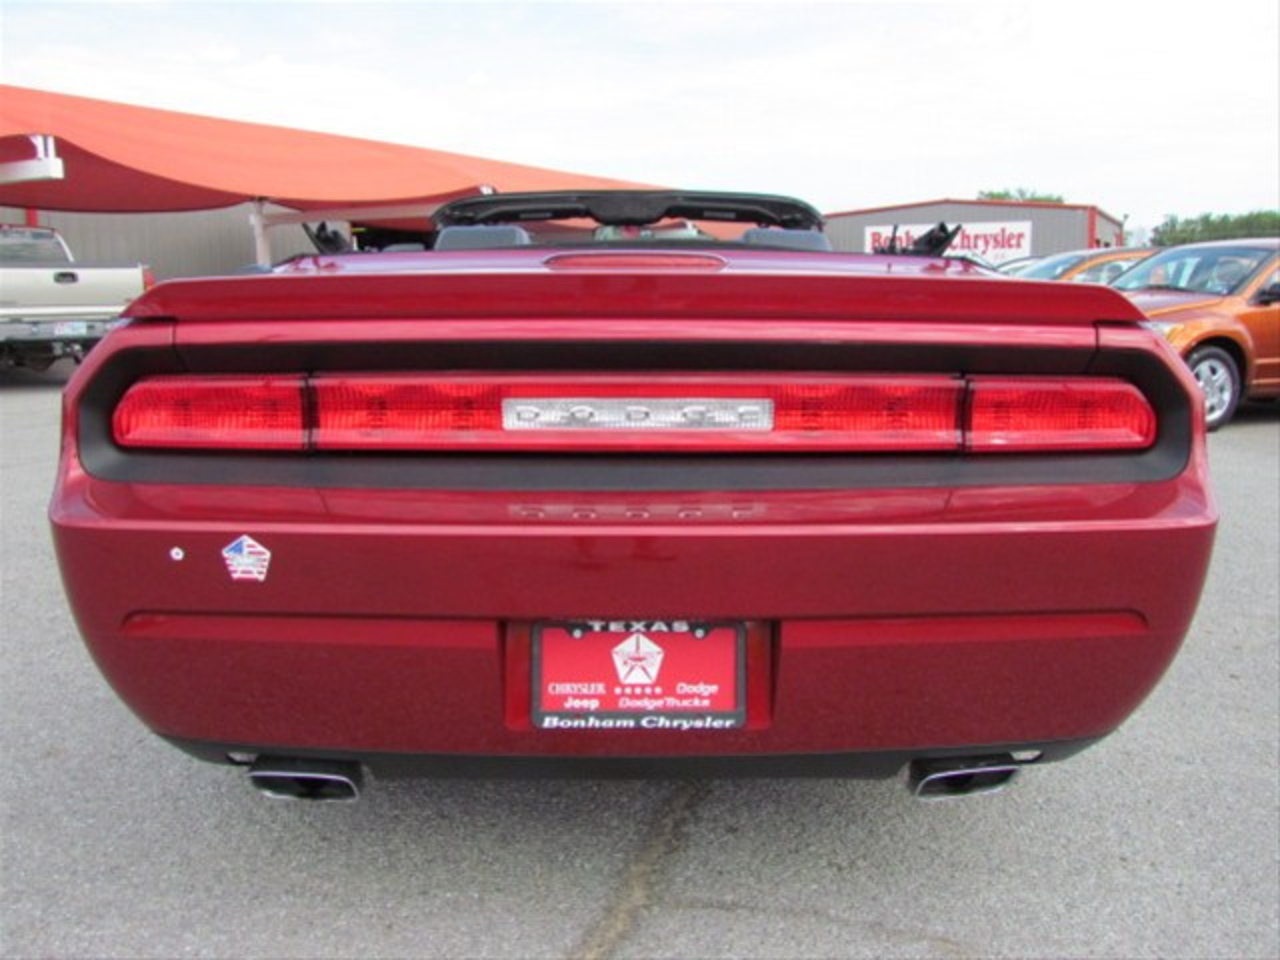 2010 Dodge Challenger RT convertible | Flickr - Photo Sharing!